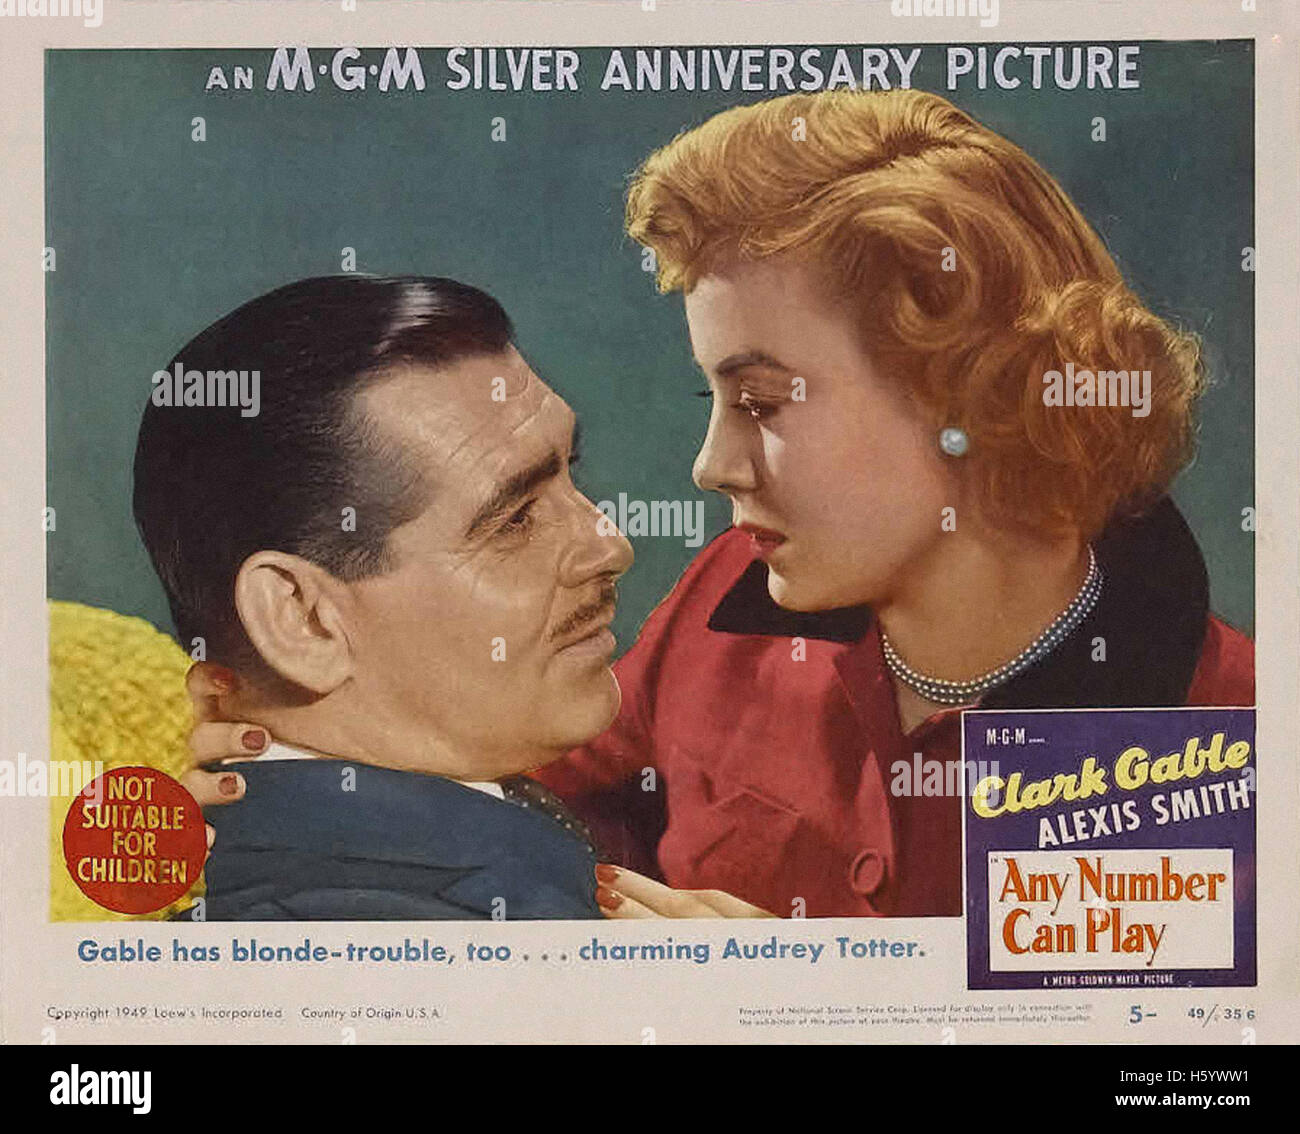 Any Number Can Play (1949) - Movie Poster Stock Photo - Alamy